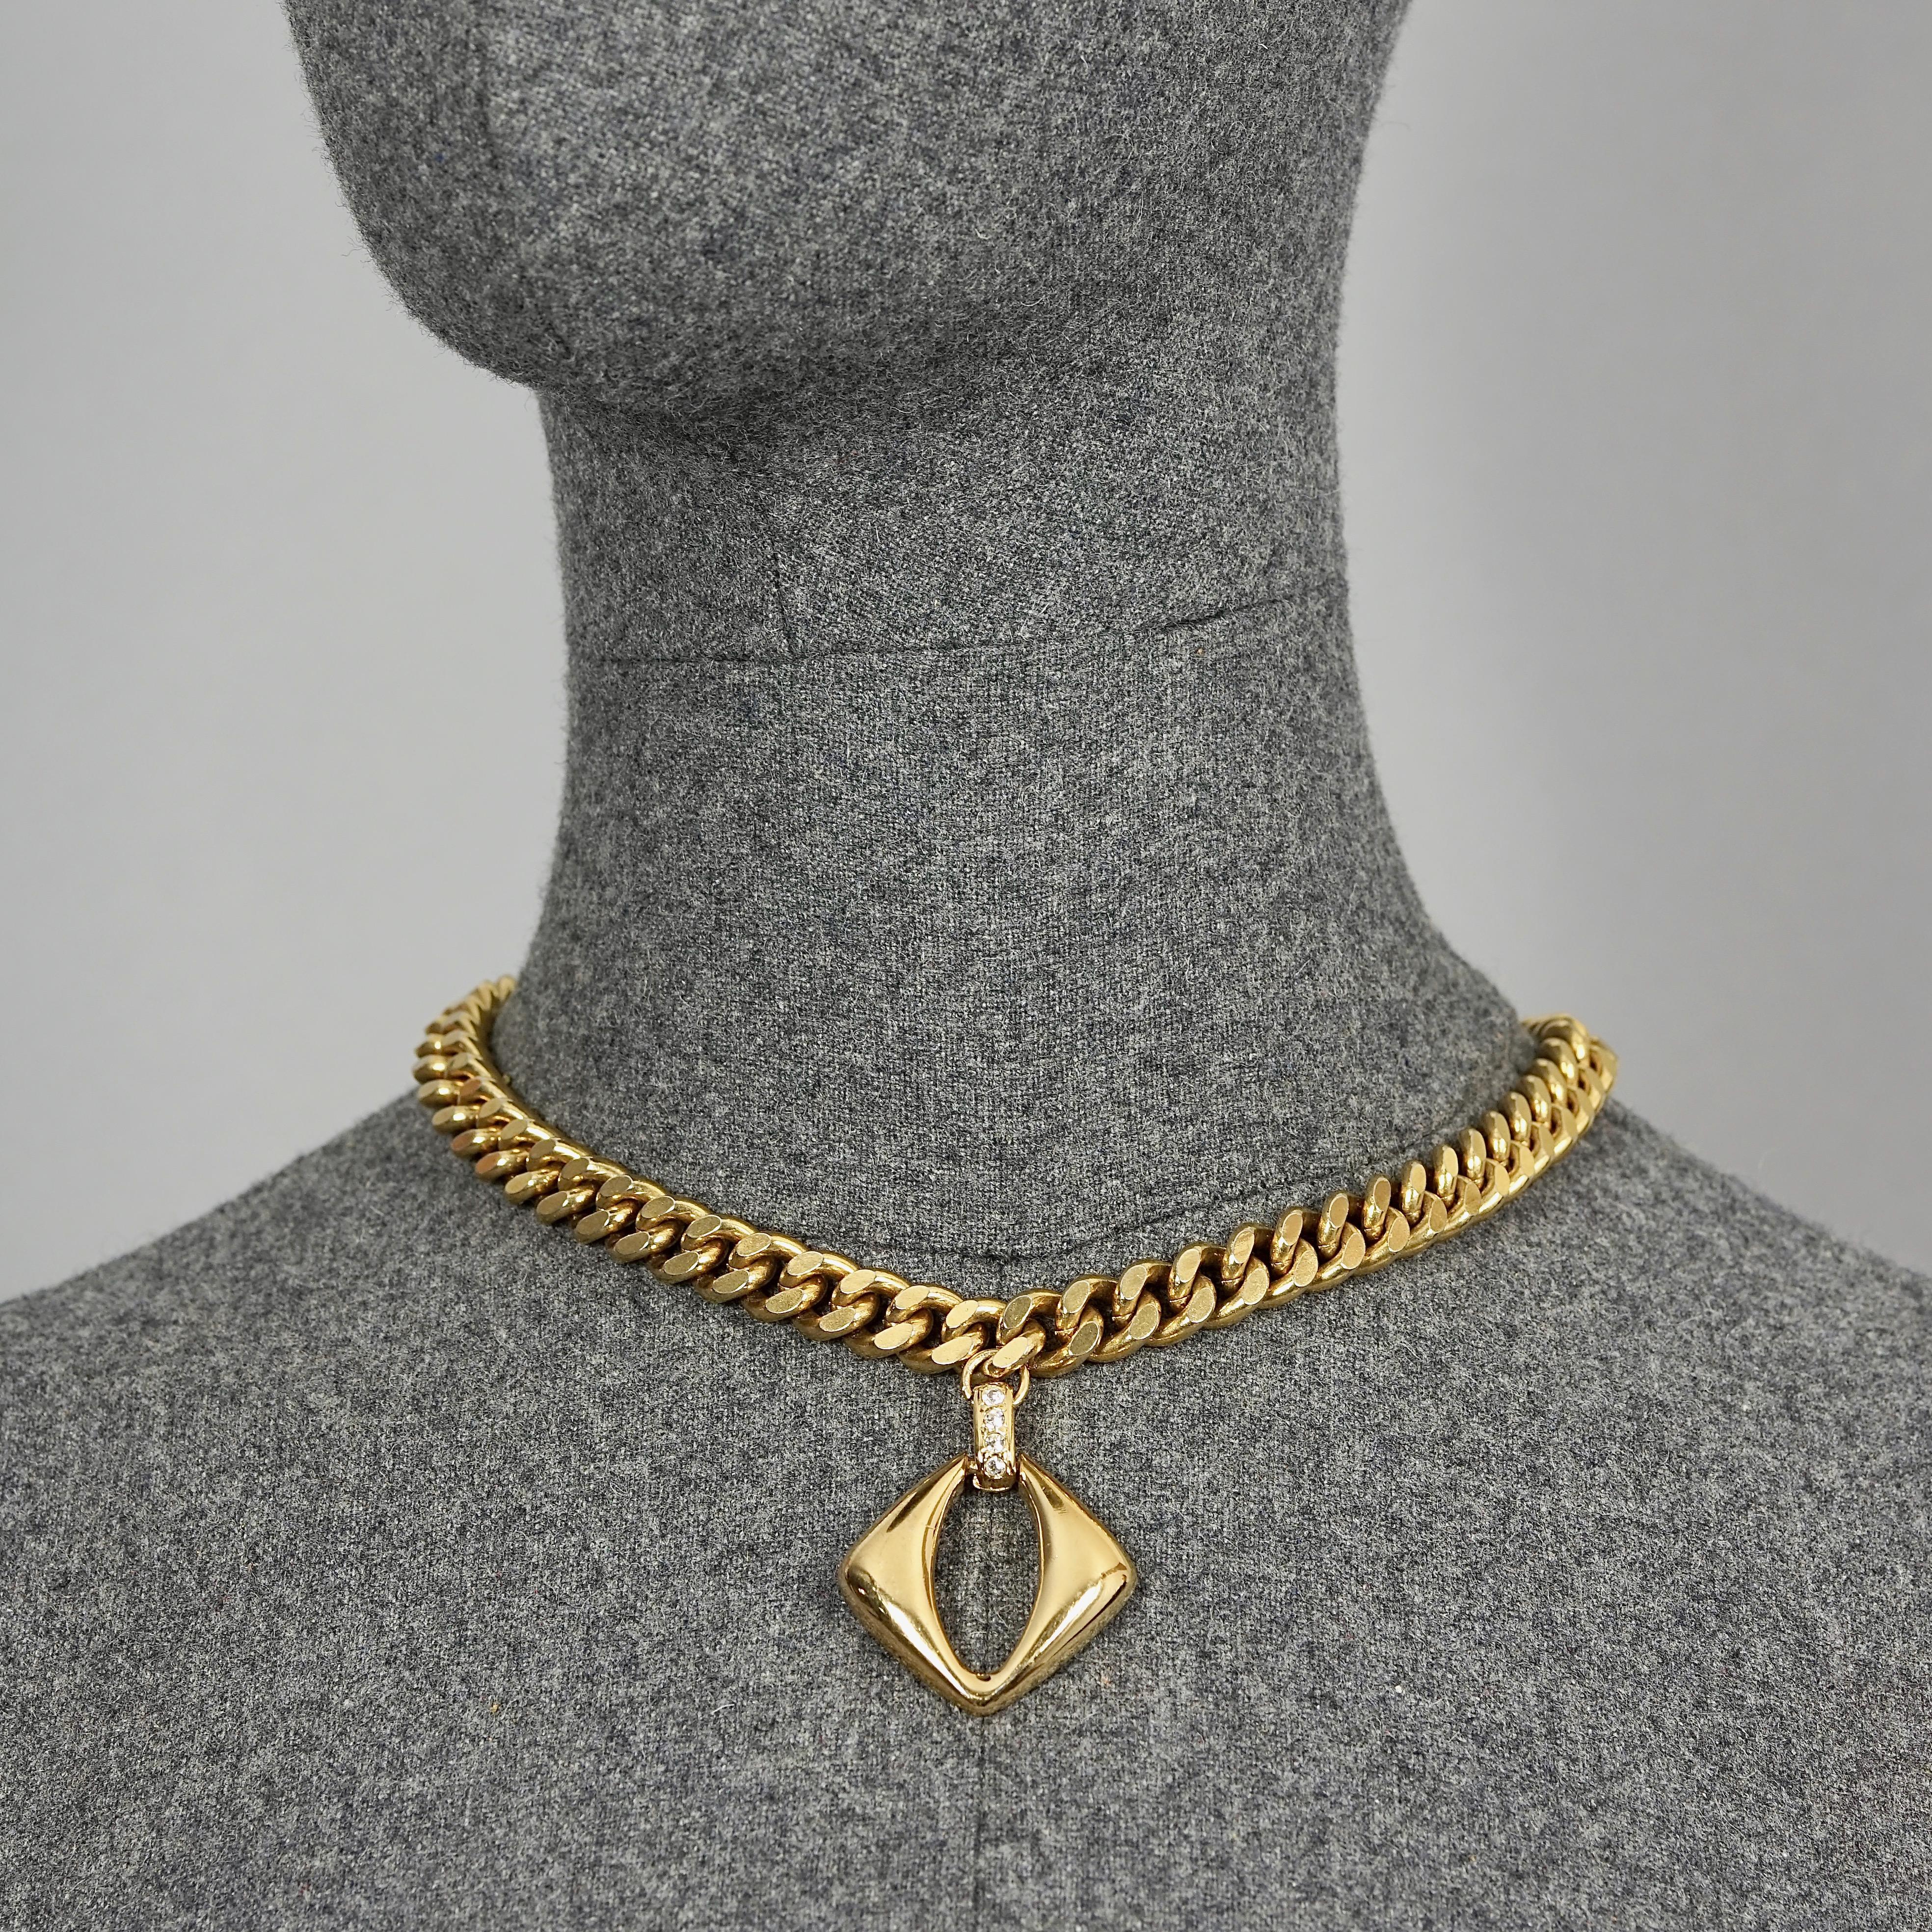 Vintage YVES SAINT LAURENT Ysl Openwork Diamond Chain Necklace

Measurements:
Height: 1.65 inches (4.2 cm)
Wearable Length: 17.12 inches (43.5 cm) 

Features:
- 100% Authentic YVES SAINT LAURENT.
- Openwork diamond with rhinestone pendant.
- Lobster